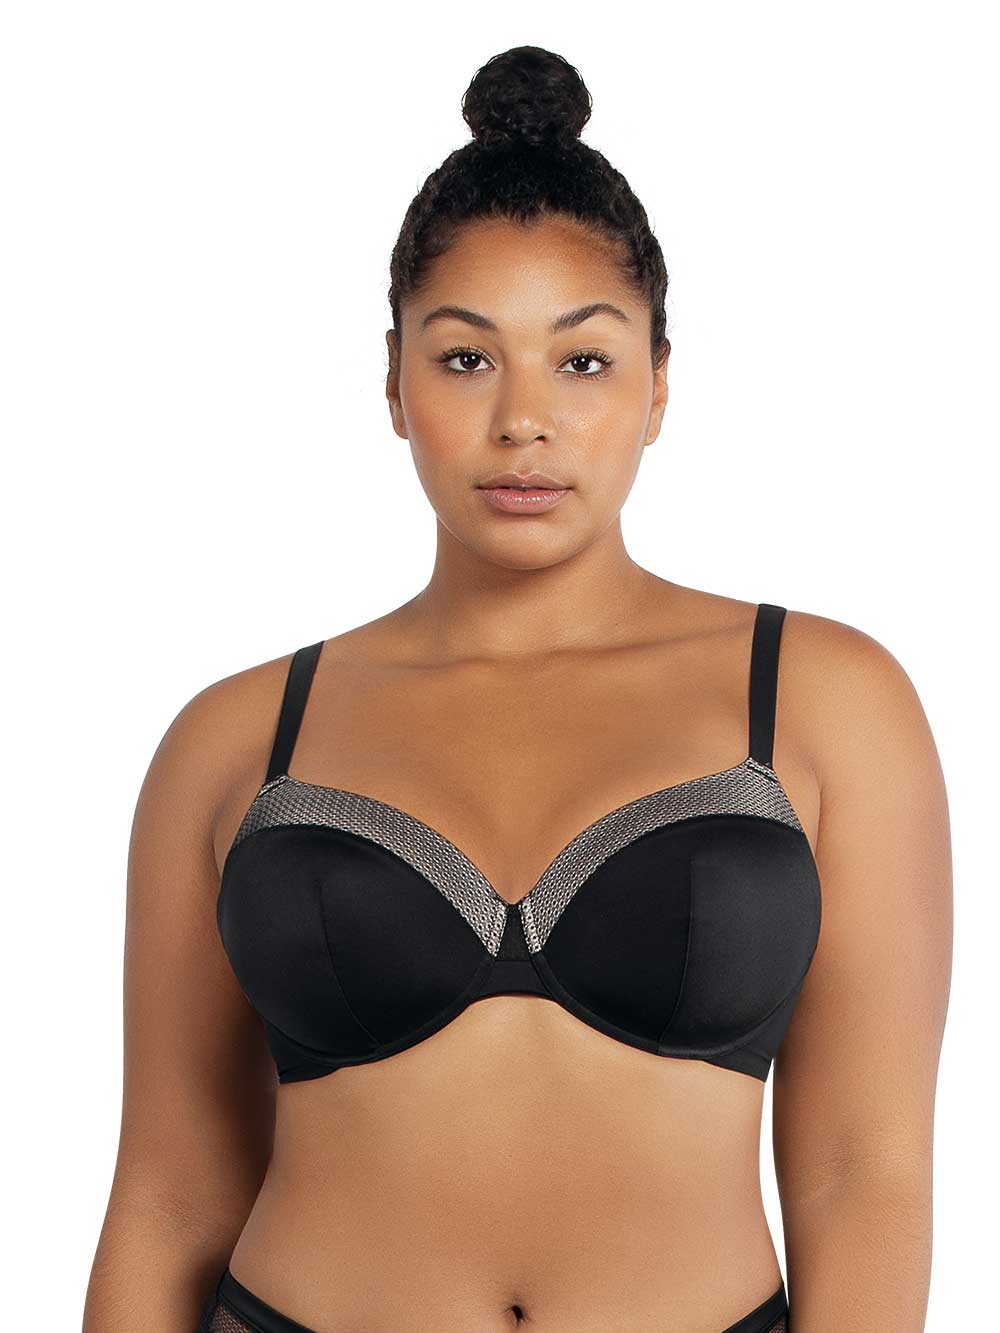 wo-fusoul Black and Friday Deals Bras for Women Plus Size Wirefree